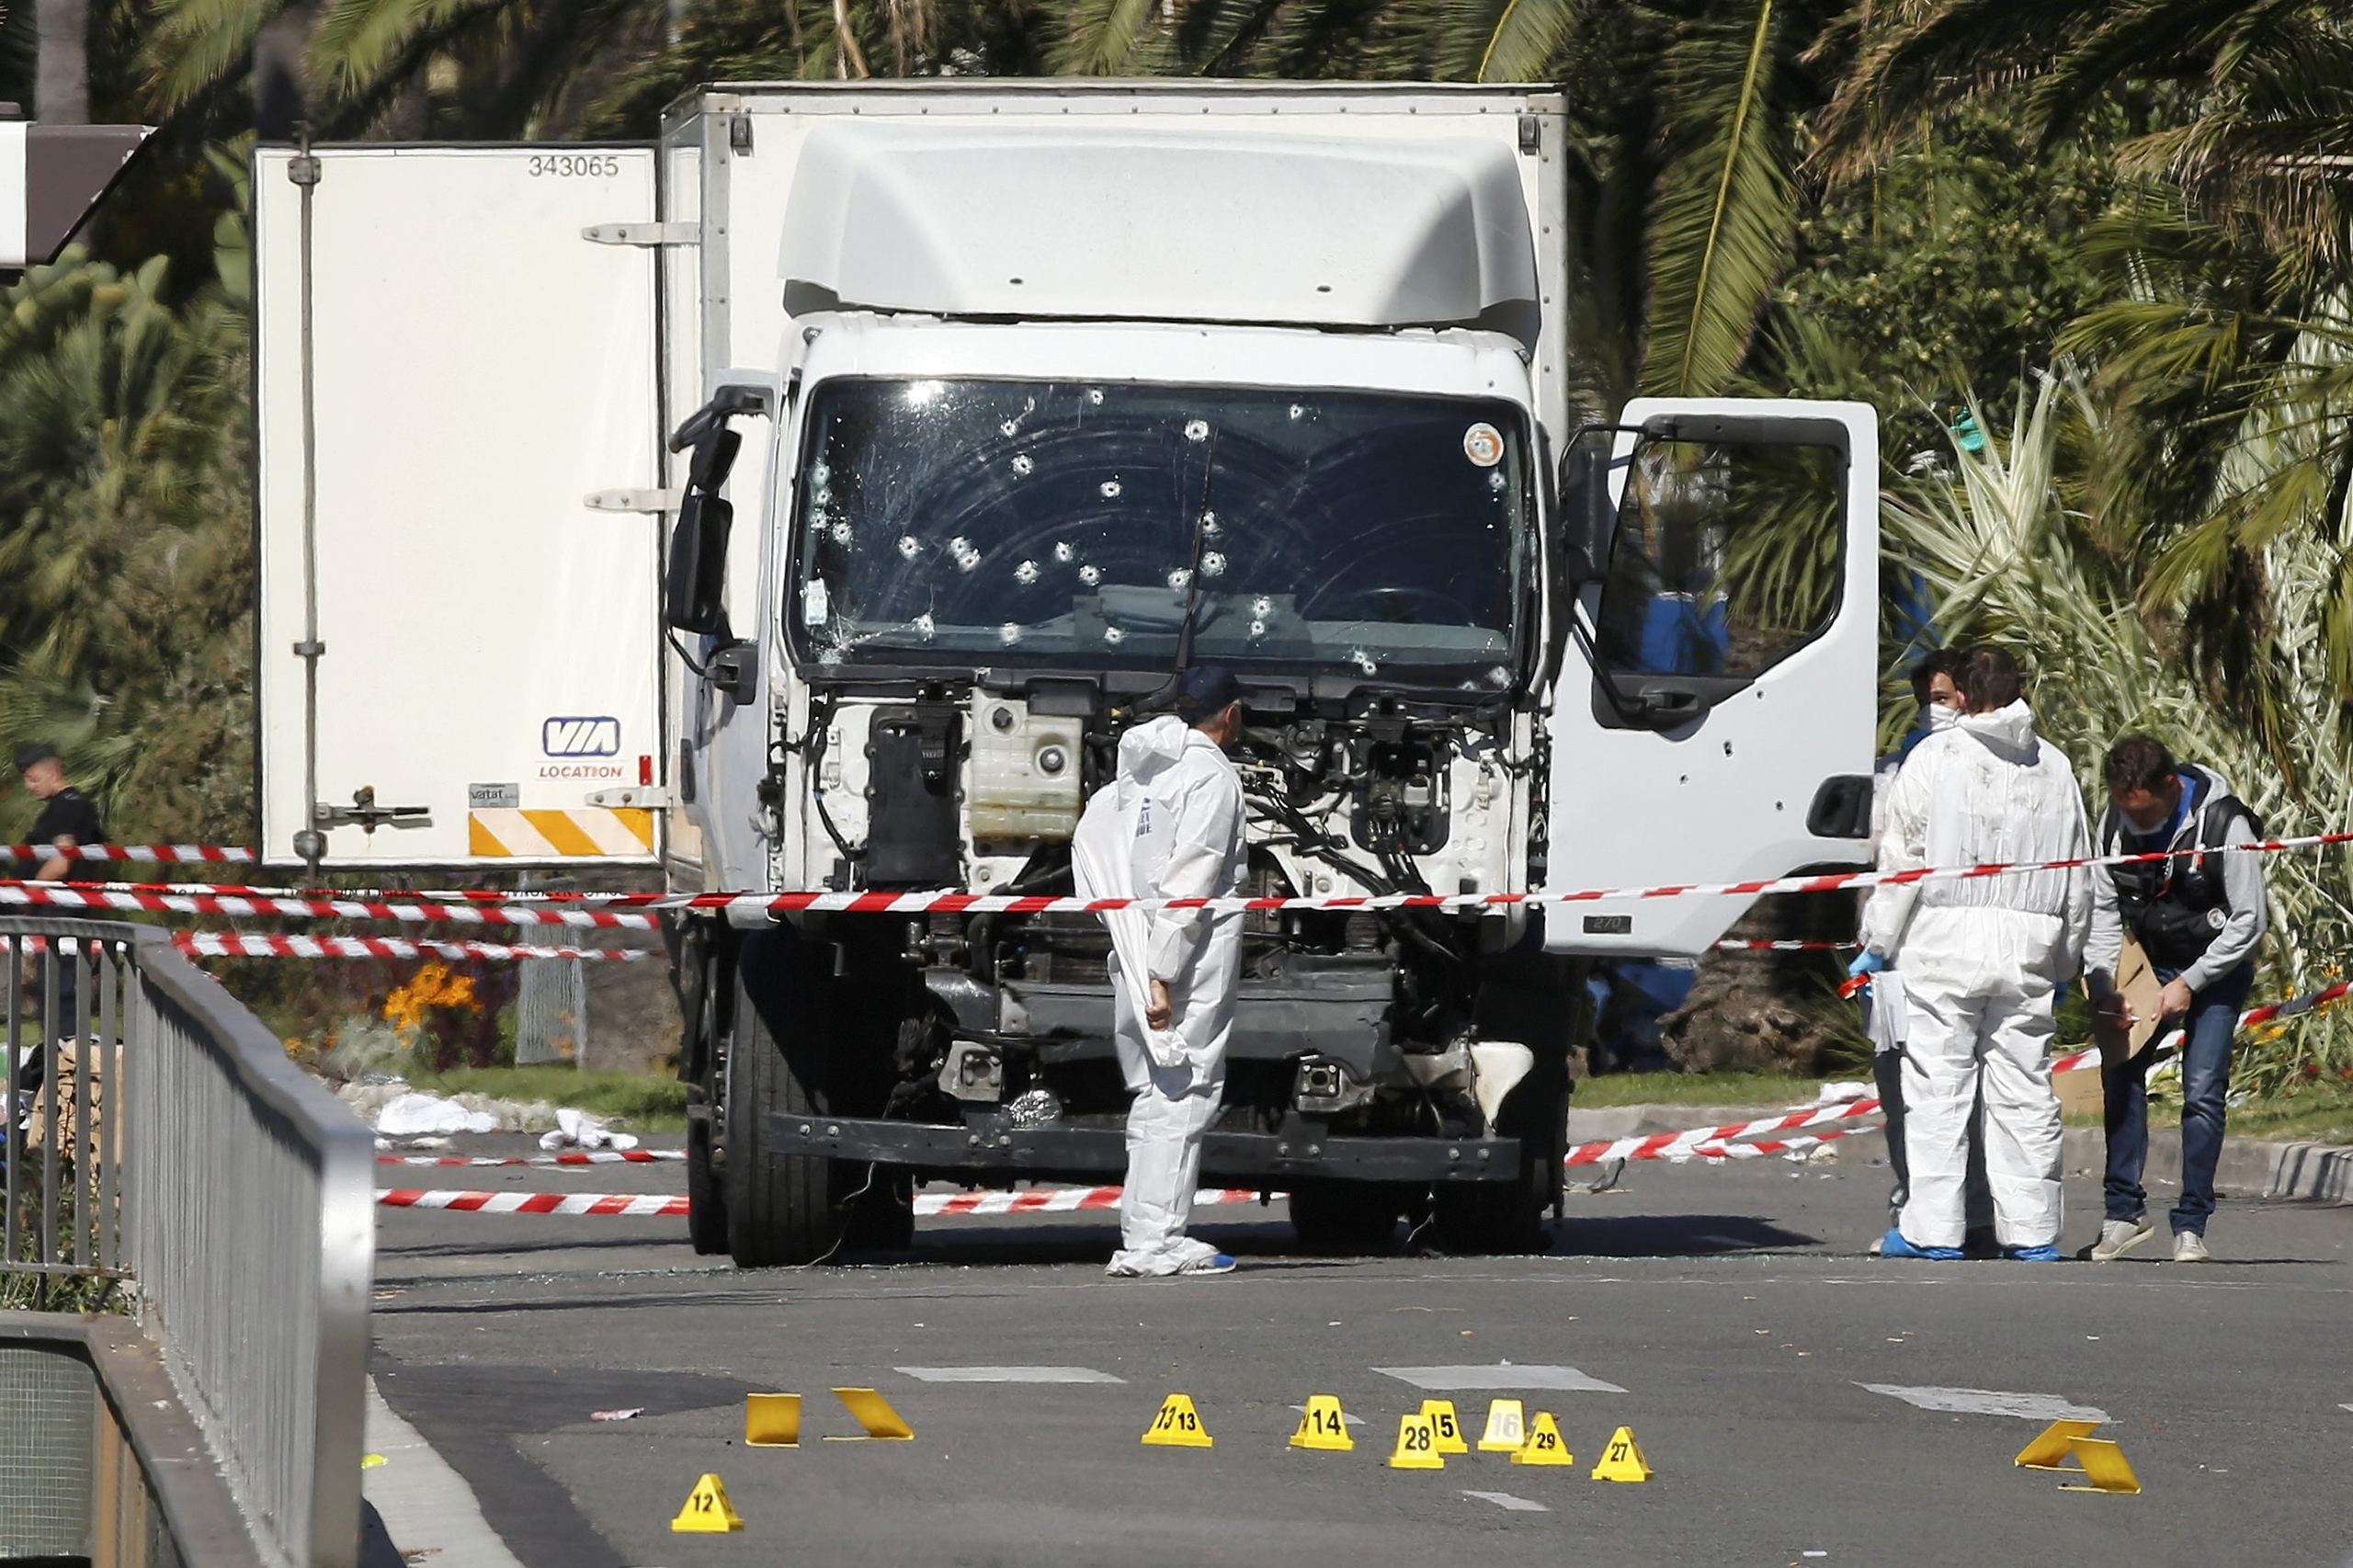 Investigators continue to work at the scene near the heavy truck that ran into a crowd at high speed killing scores who were celebrating the Bastille Day July 14 national holiday on the Promenade des Anglais in Nice